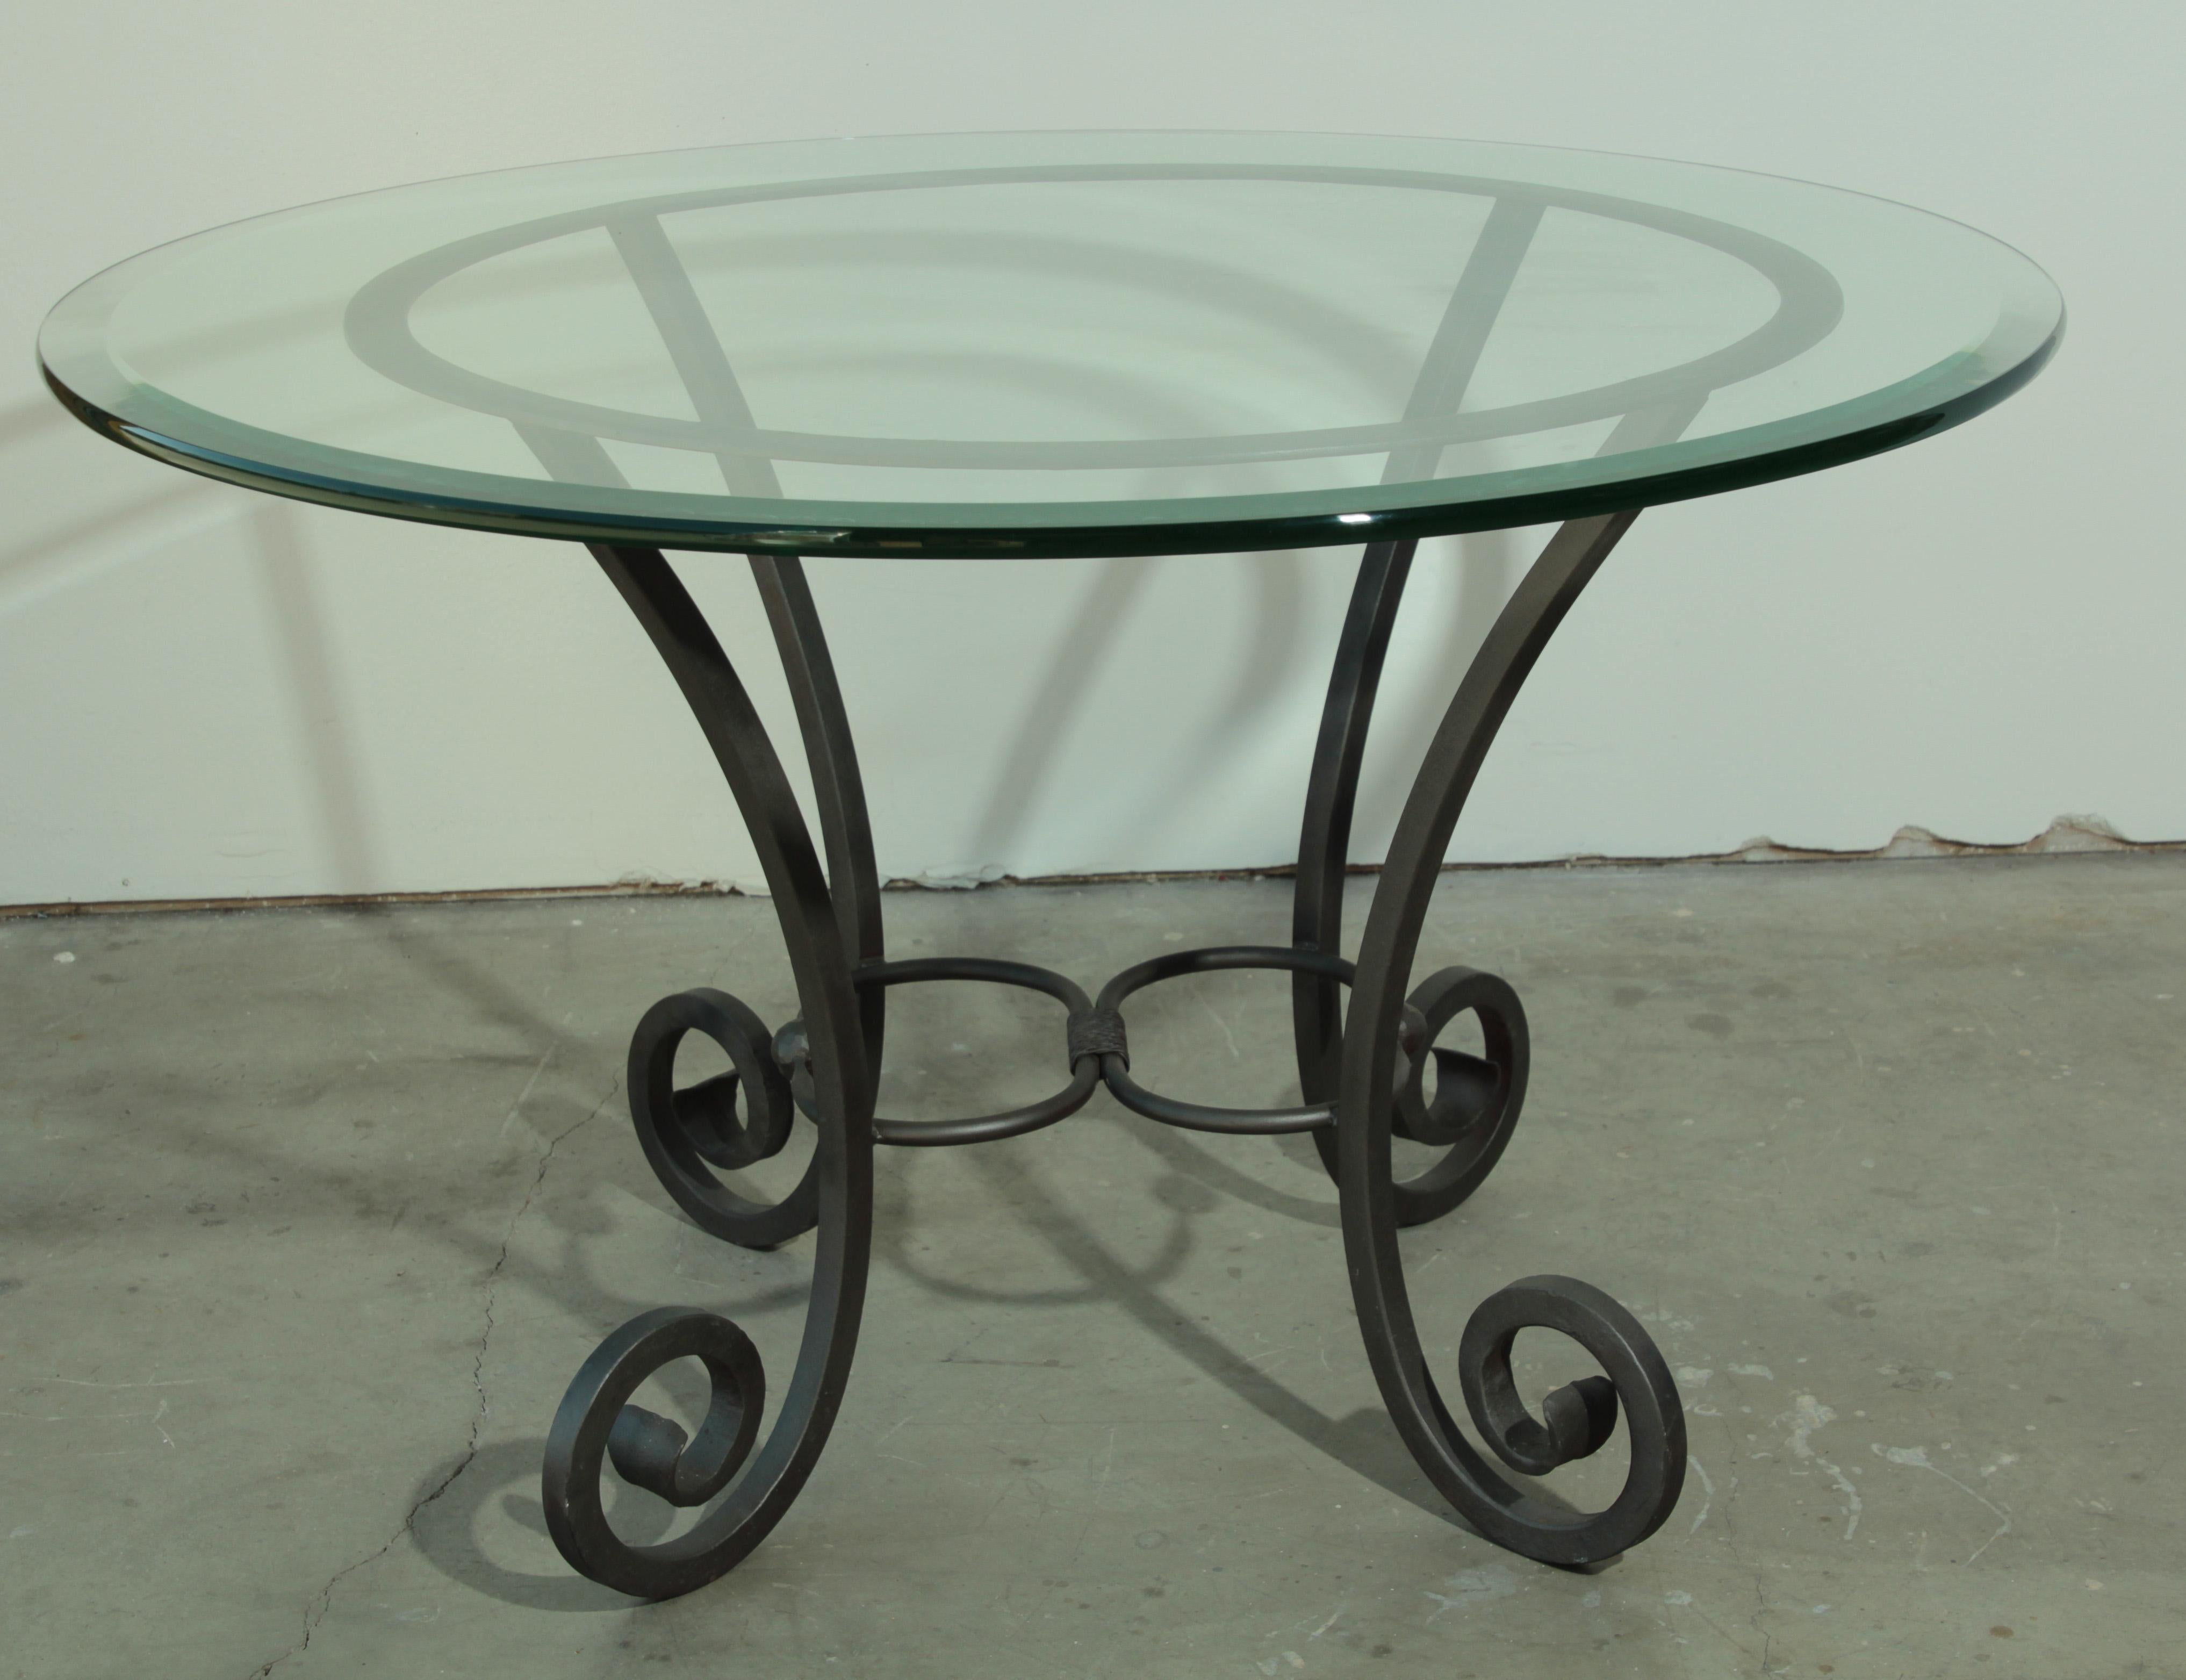 Hand forged Spanish iron table base with glass top.
Curved legs and two unique turned iron with two balls in the center.
Wrought iron dining table pedestal with curved legs.
Could be use indoor or outdoor.
Spanish Moorish style.
Dimensions:
Diameter